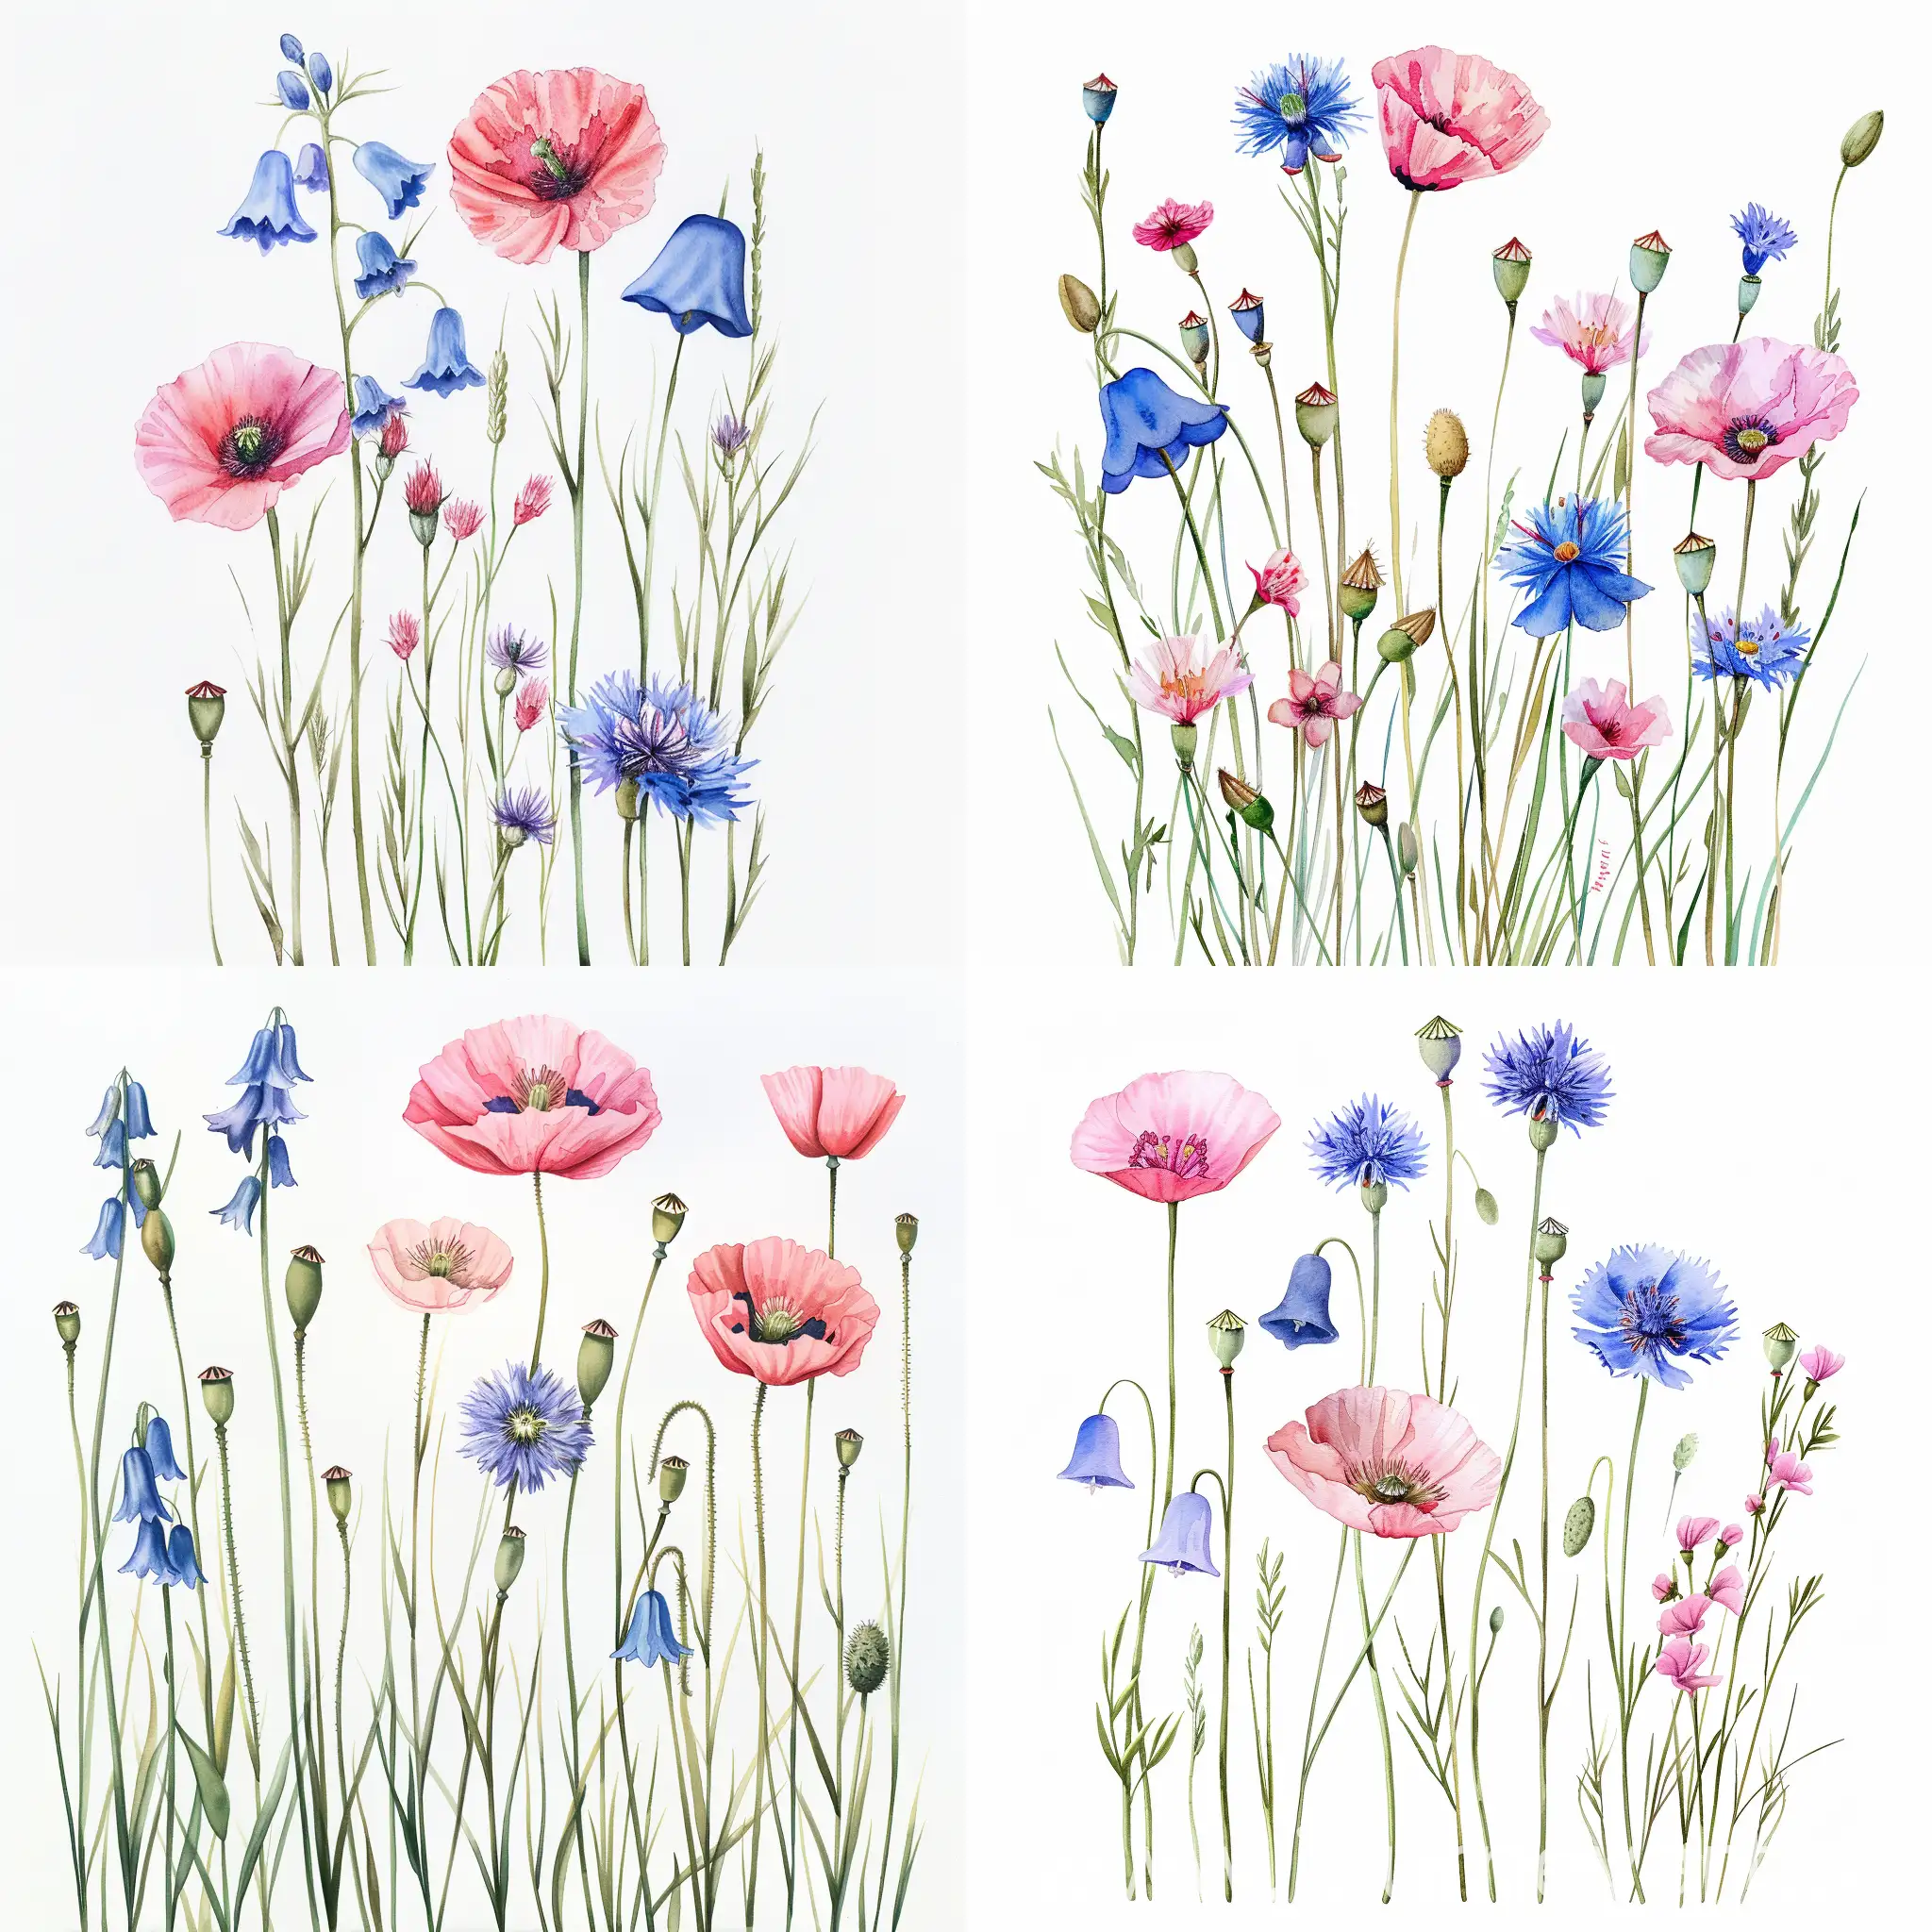 Watercolor-Wildflower-Bouquet-Vibrant-Bellflowers-Cornflowers-and-Pink-Poppy-on-White-Background